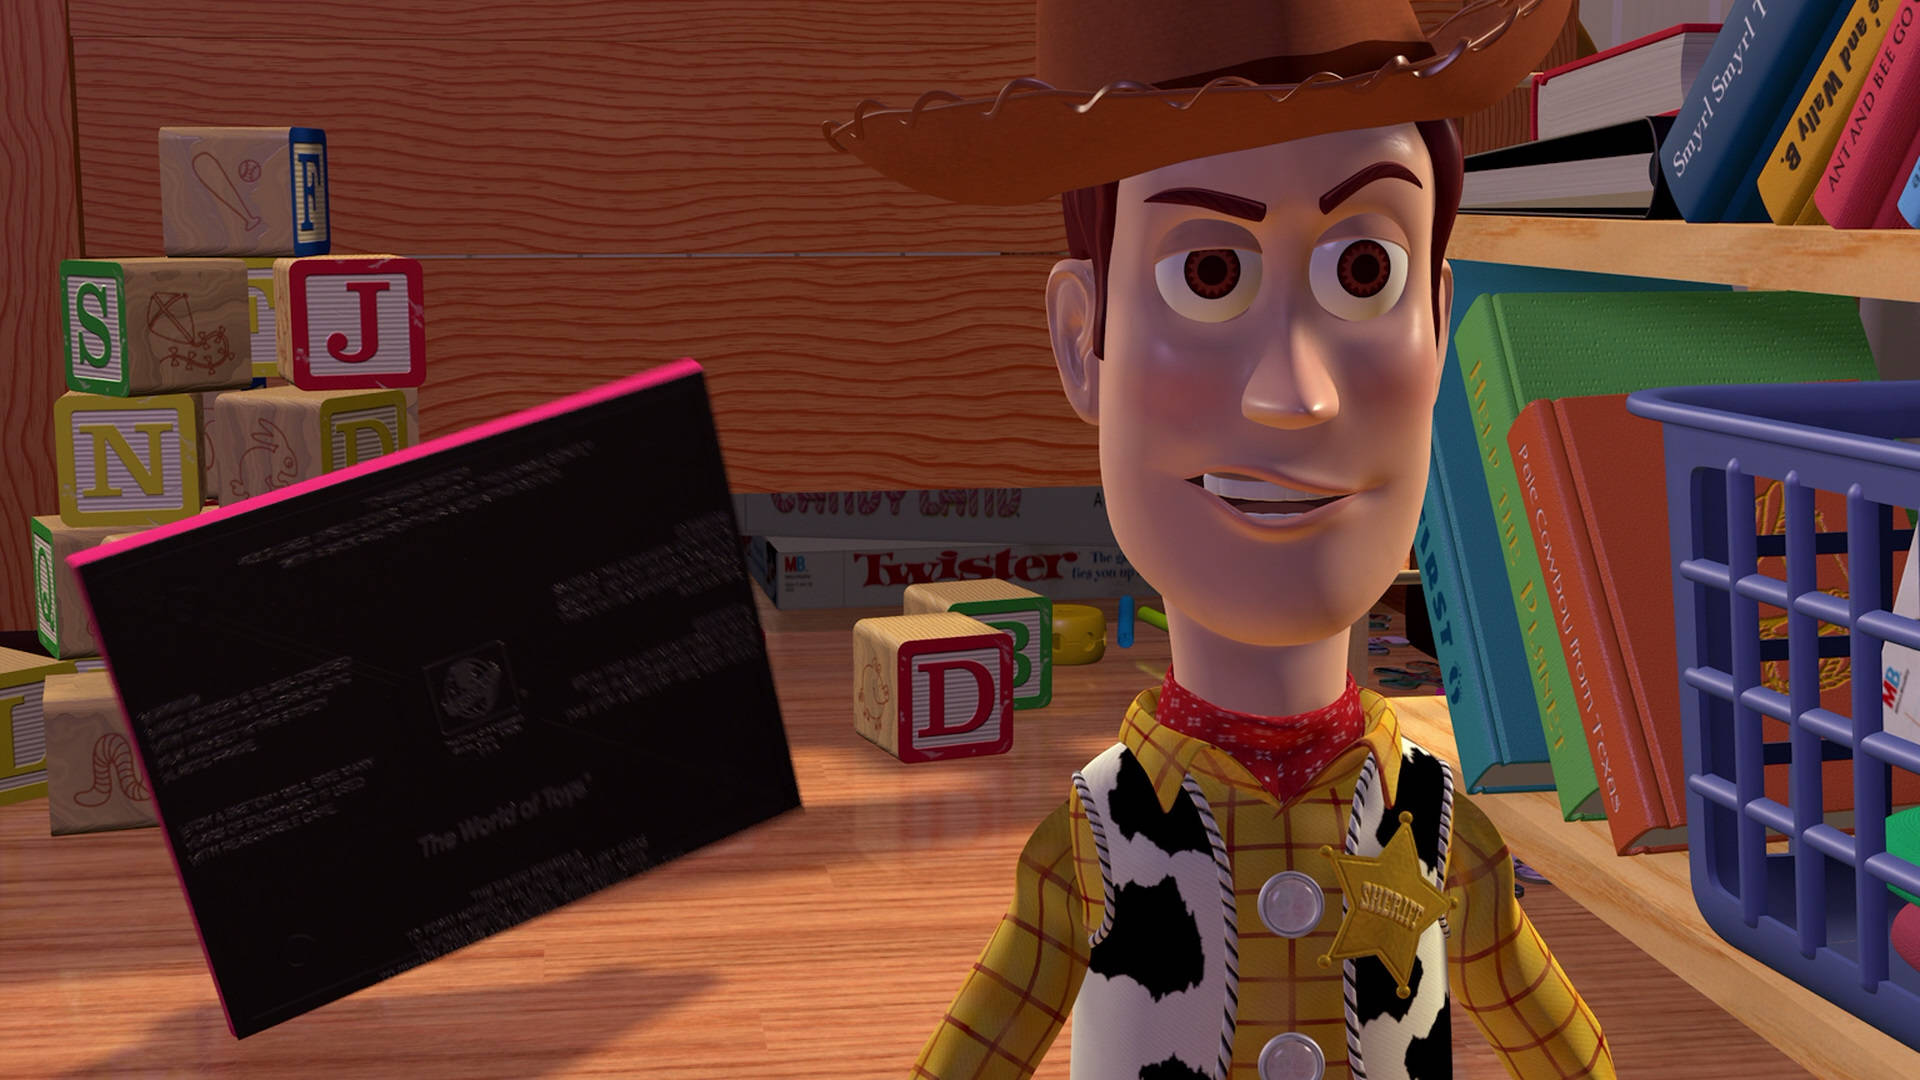 Toy Story 3 Woody In Stock Room Wallpaper